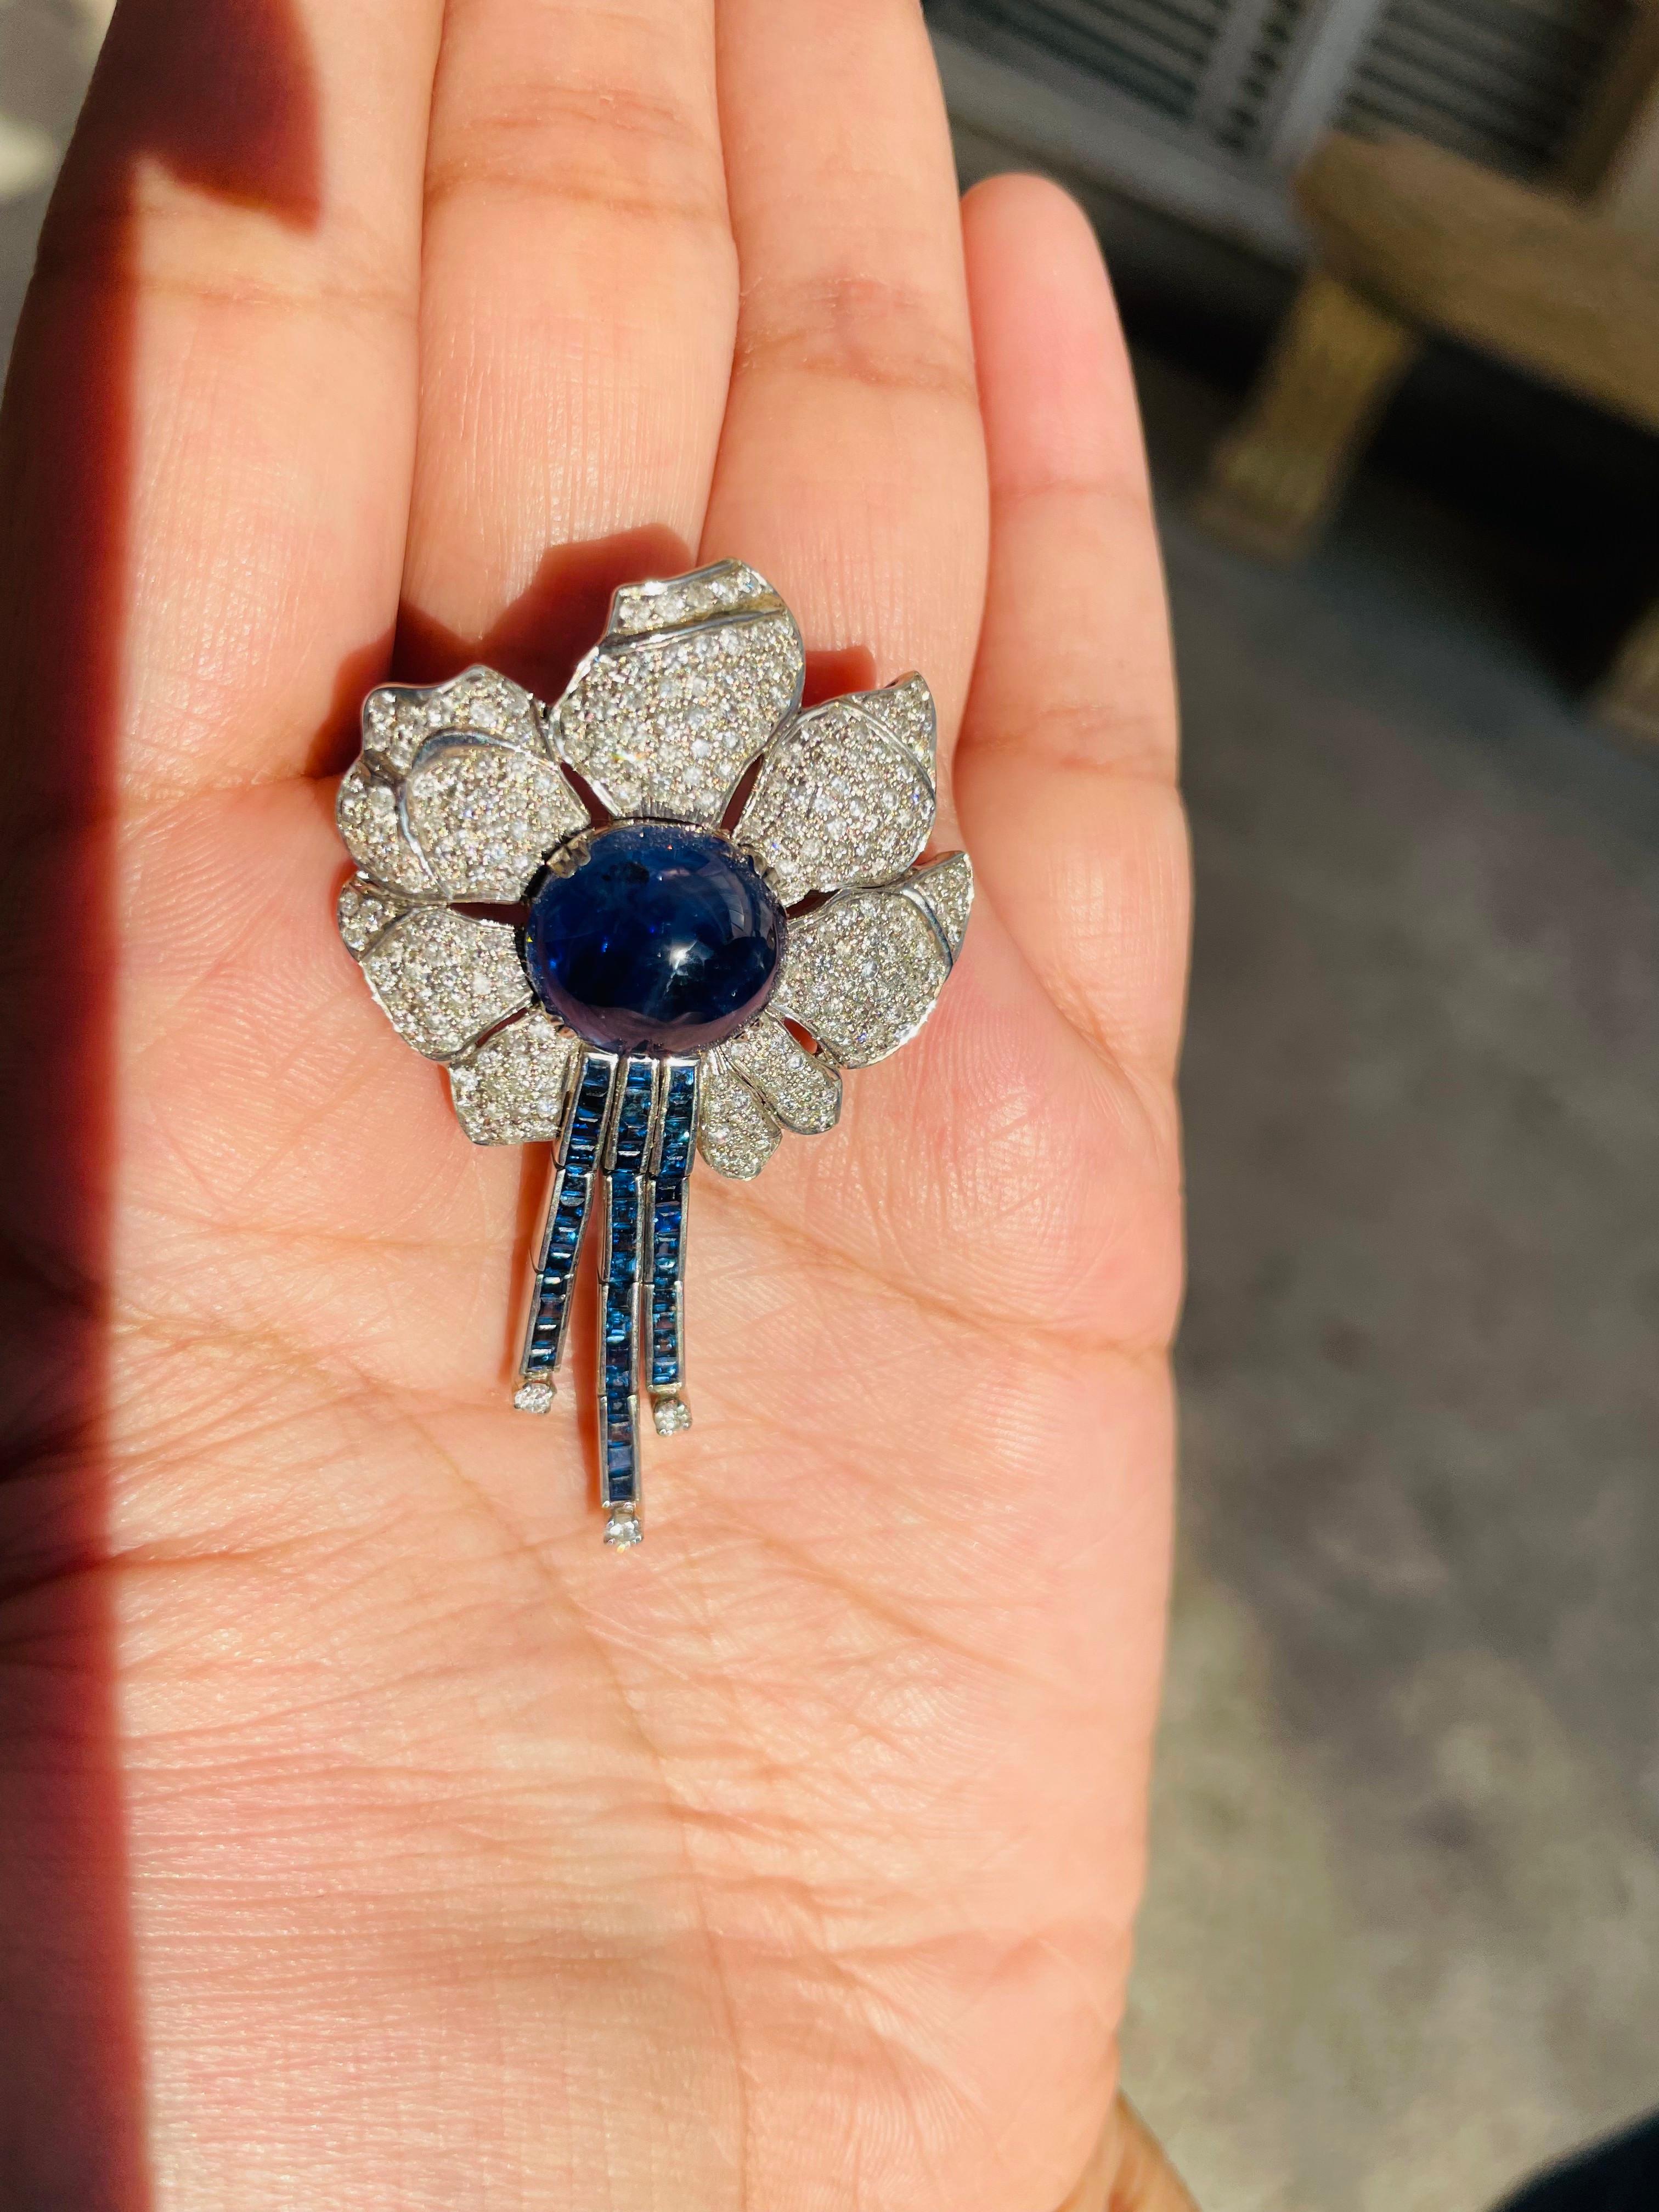 Statement Diamond and Sapphire Flower Brooch Made in 18 gold which is a fusion of surrealism and pop-art, designed to make a bold statement. Crafted with love and attention to detail, this features 12.5 carats of blue sapphire which makes you stand